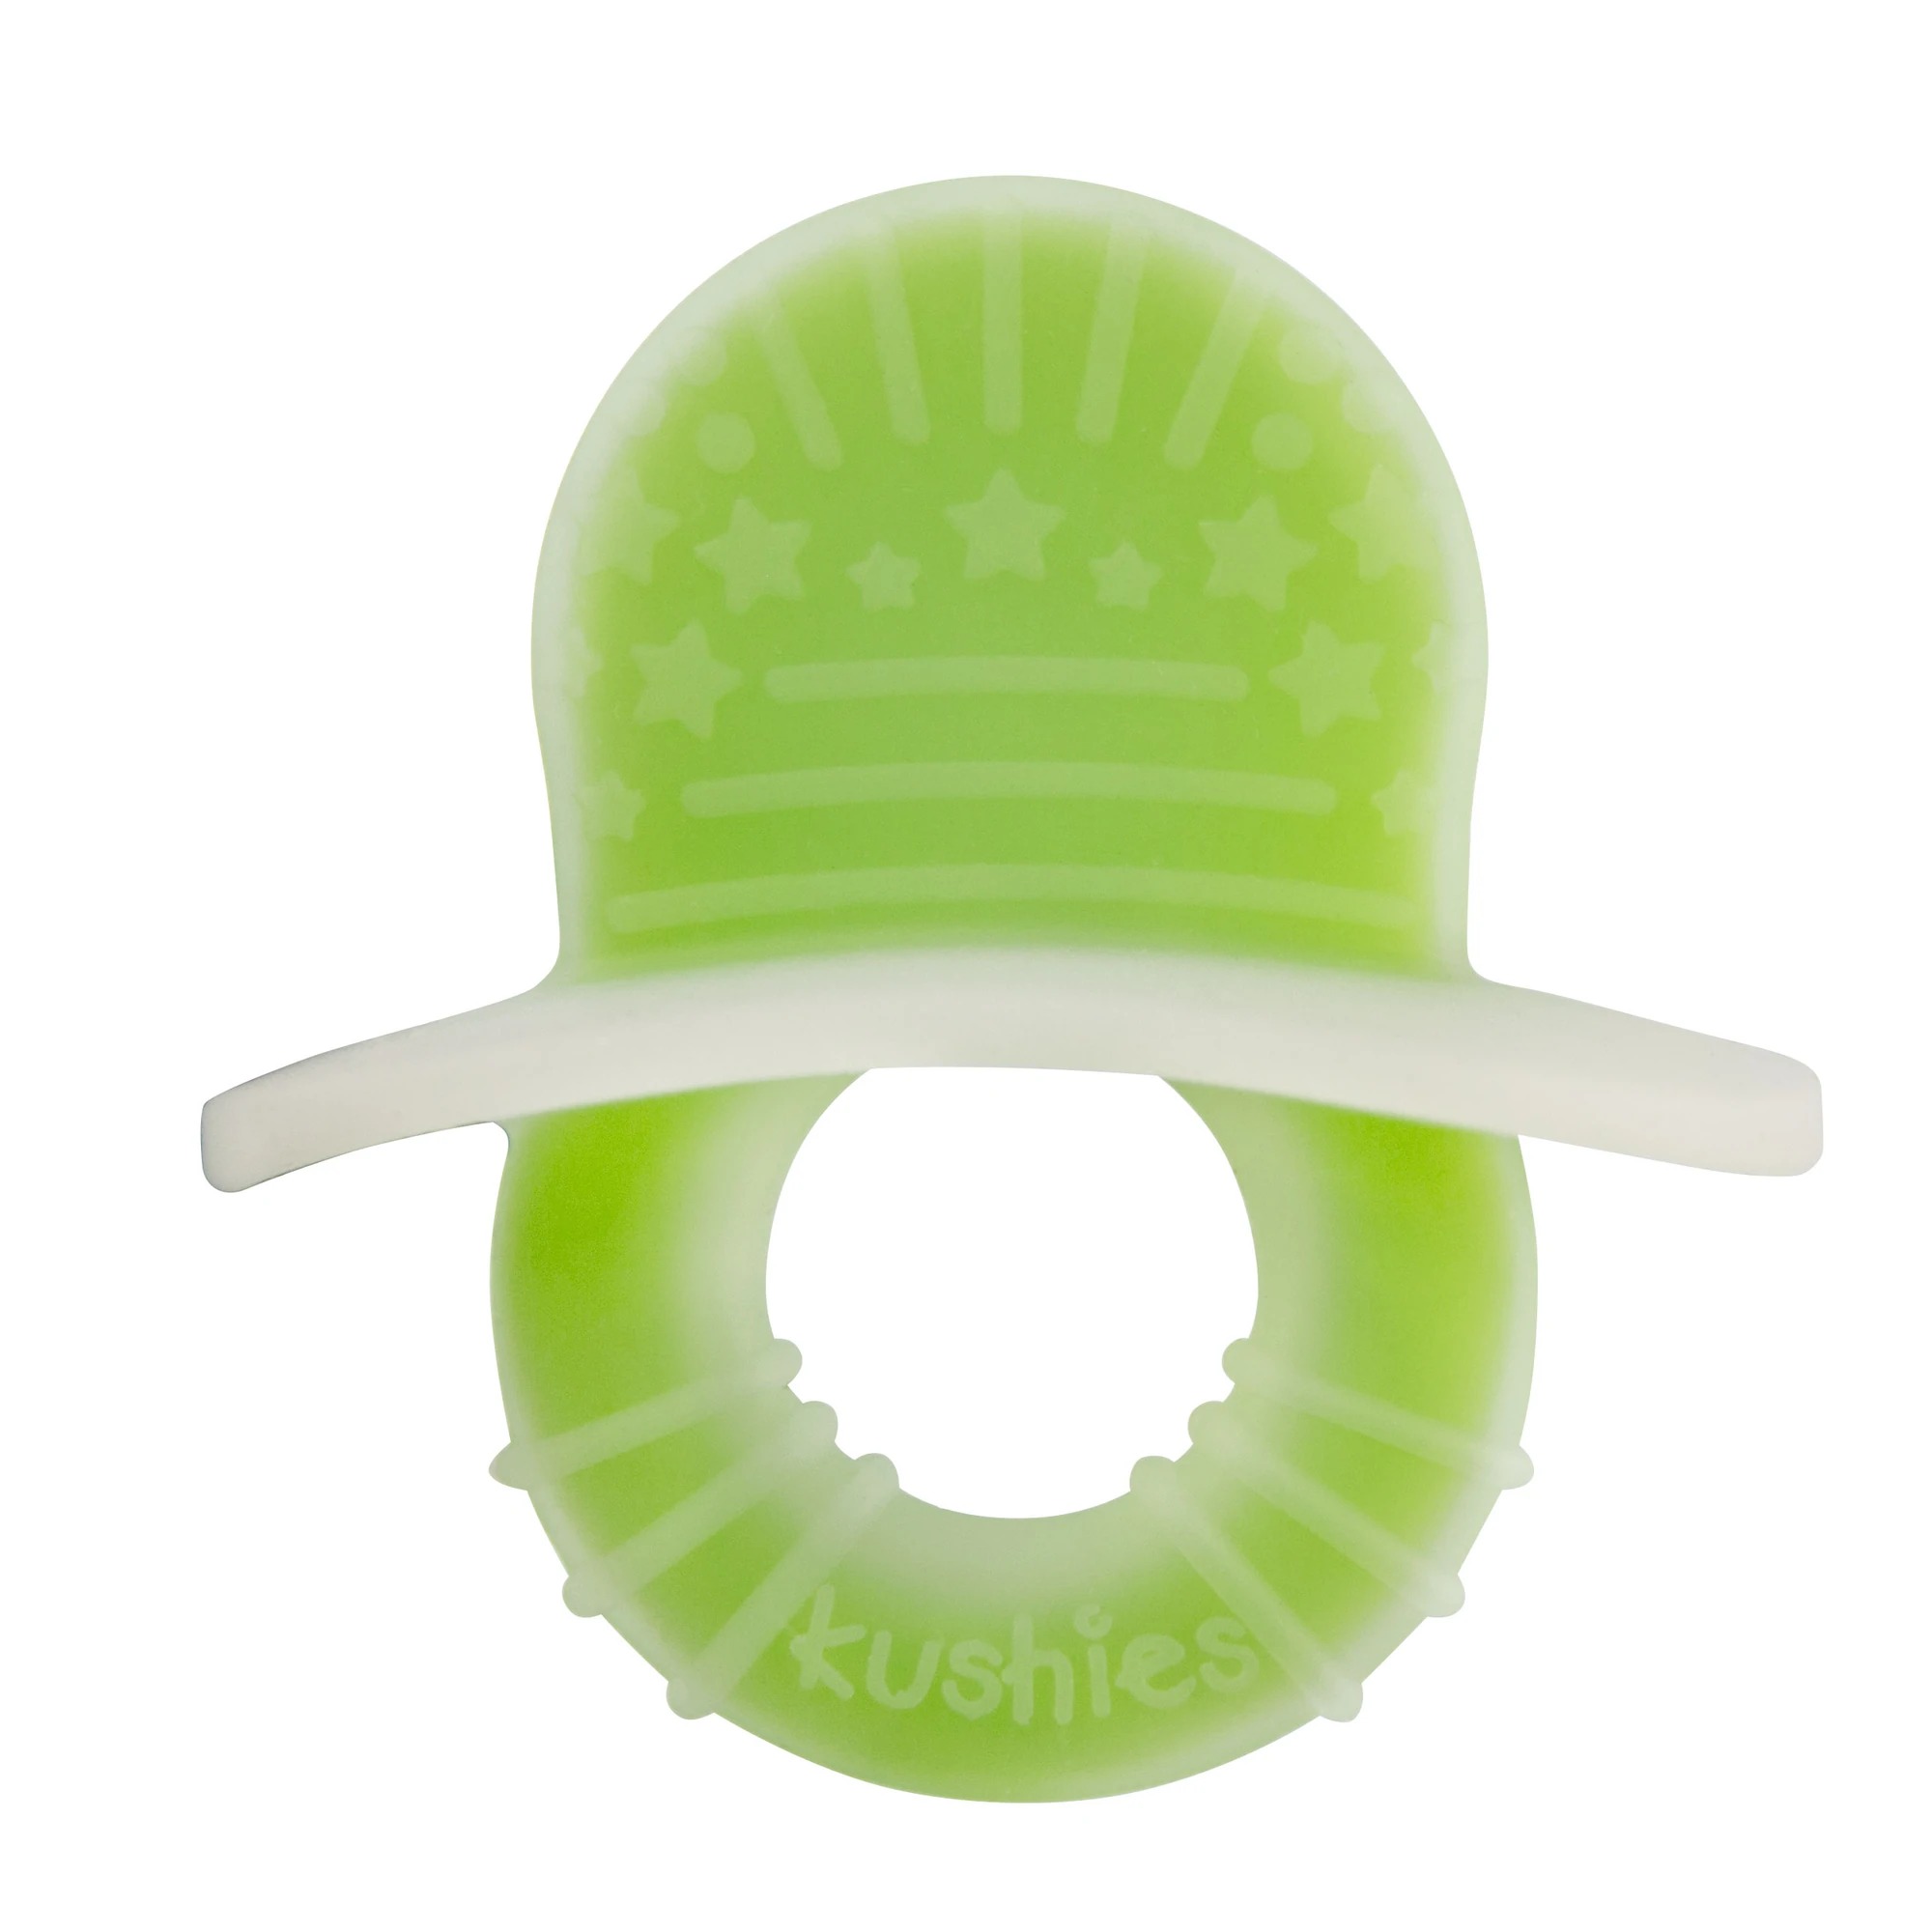 Kushies Silisoothe Silicone Teether - Lime